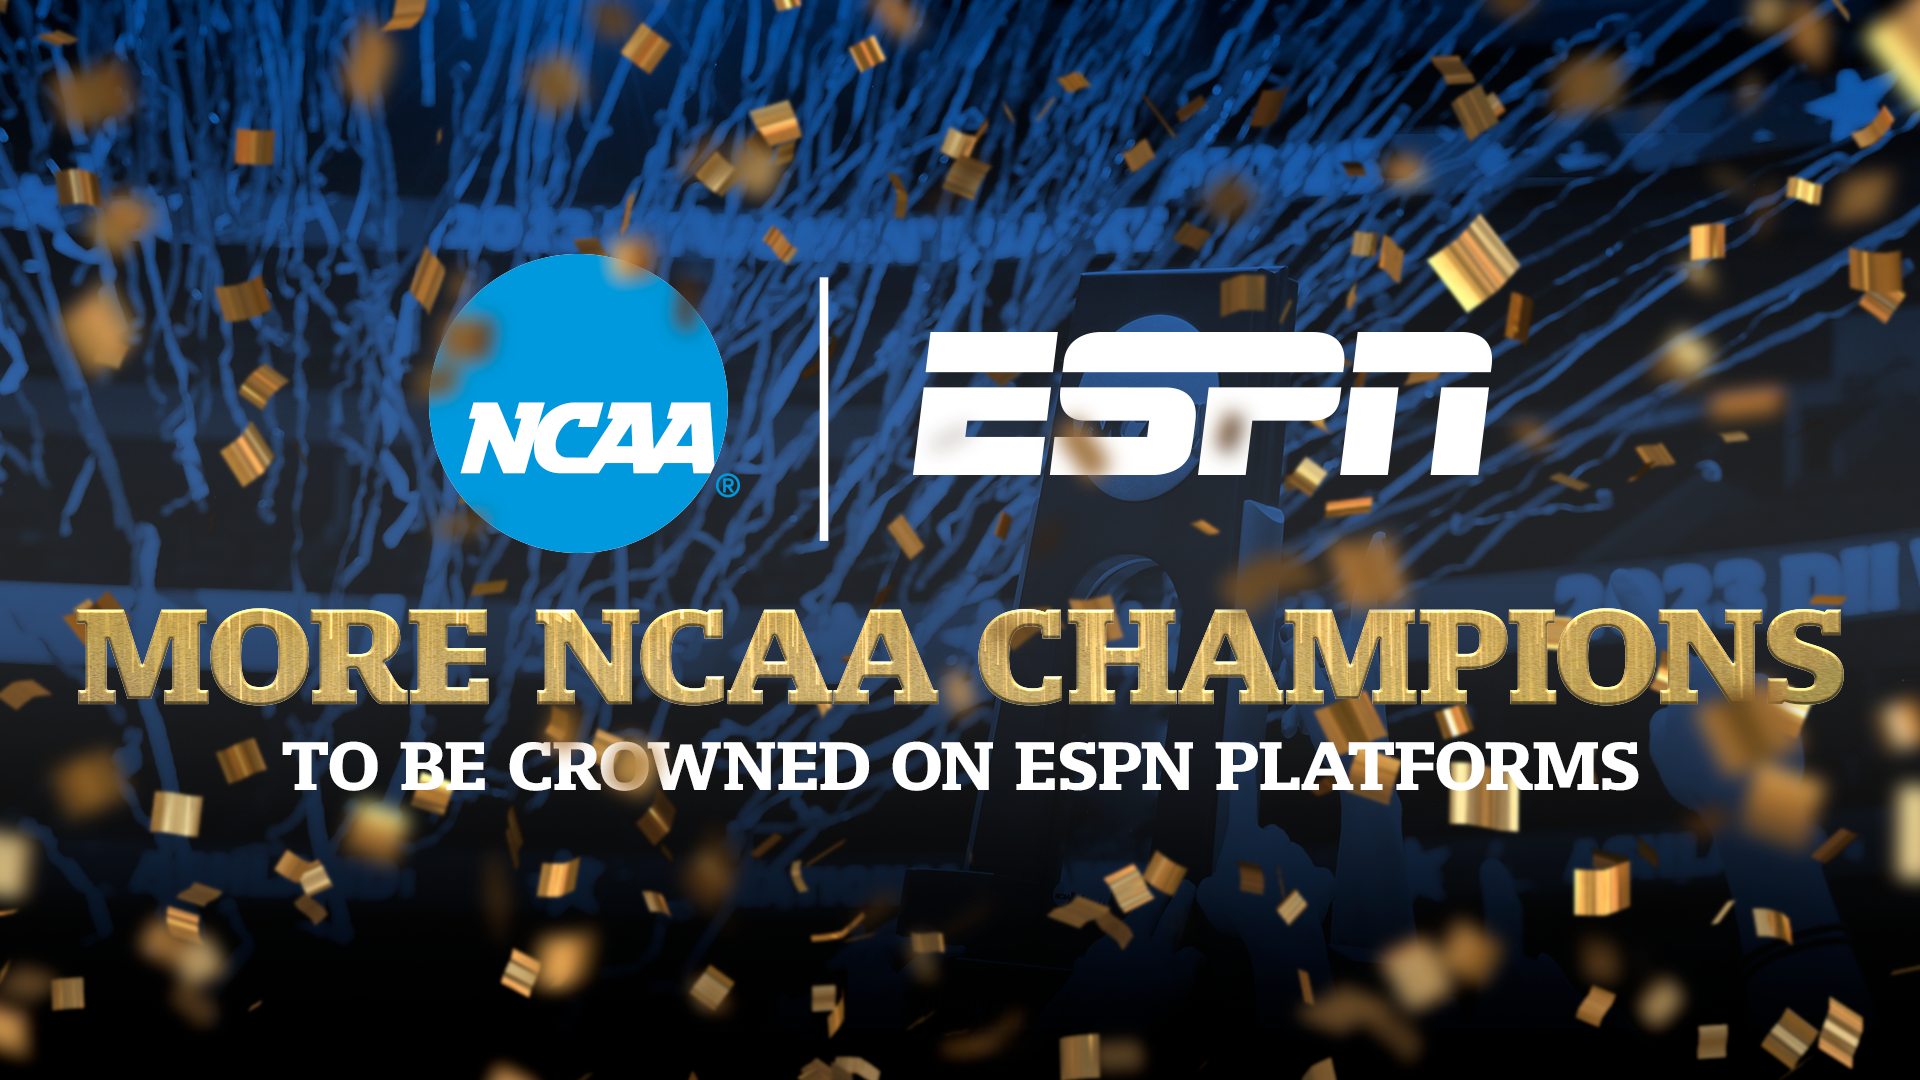 ESPN and NCAA Reach New, Eight-Year Media Rights Agreement